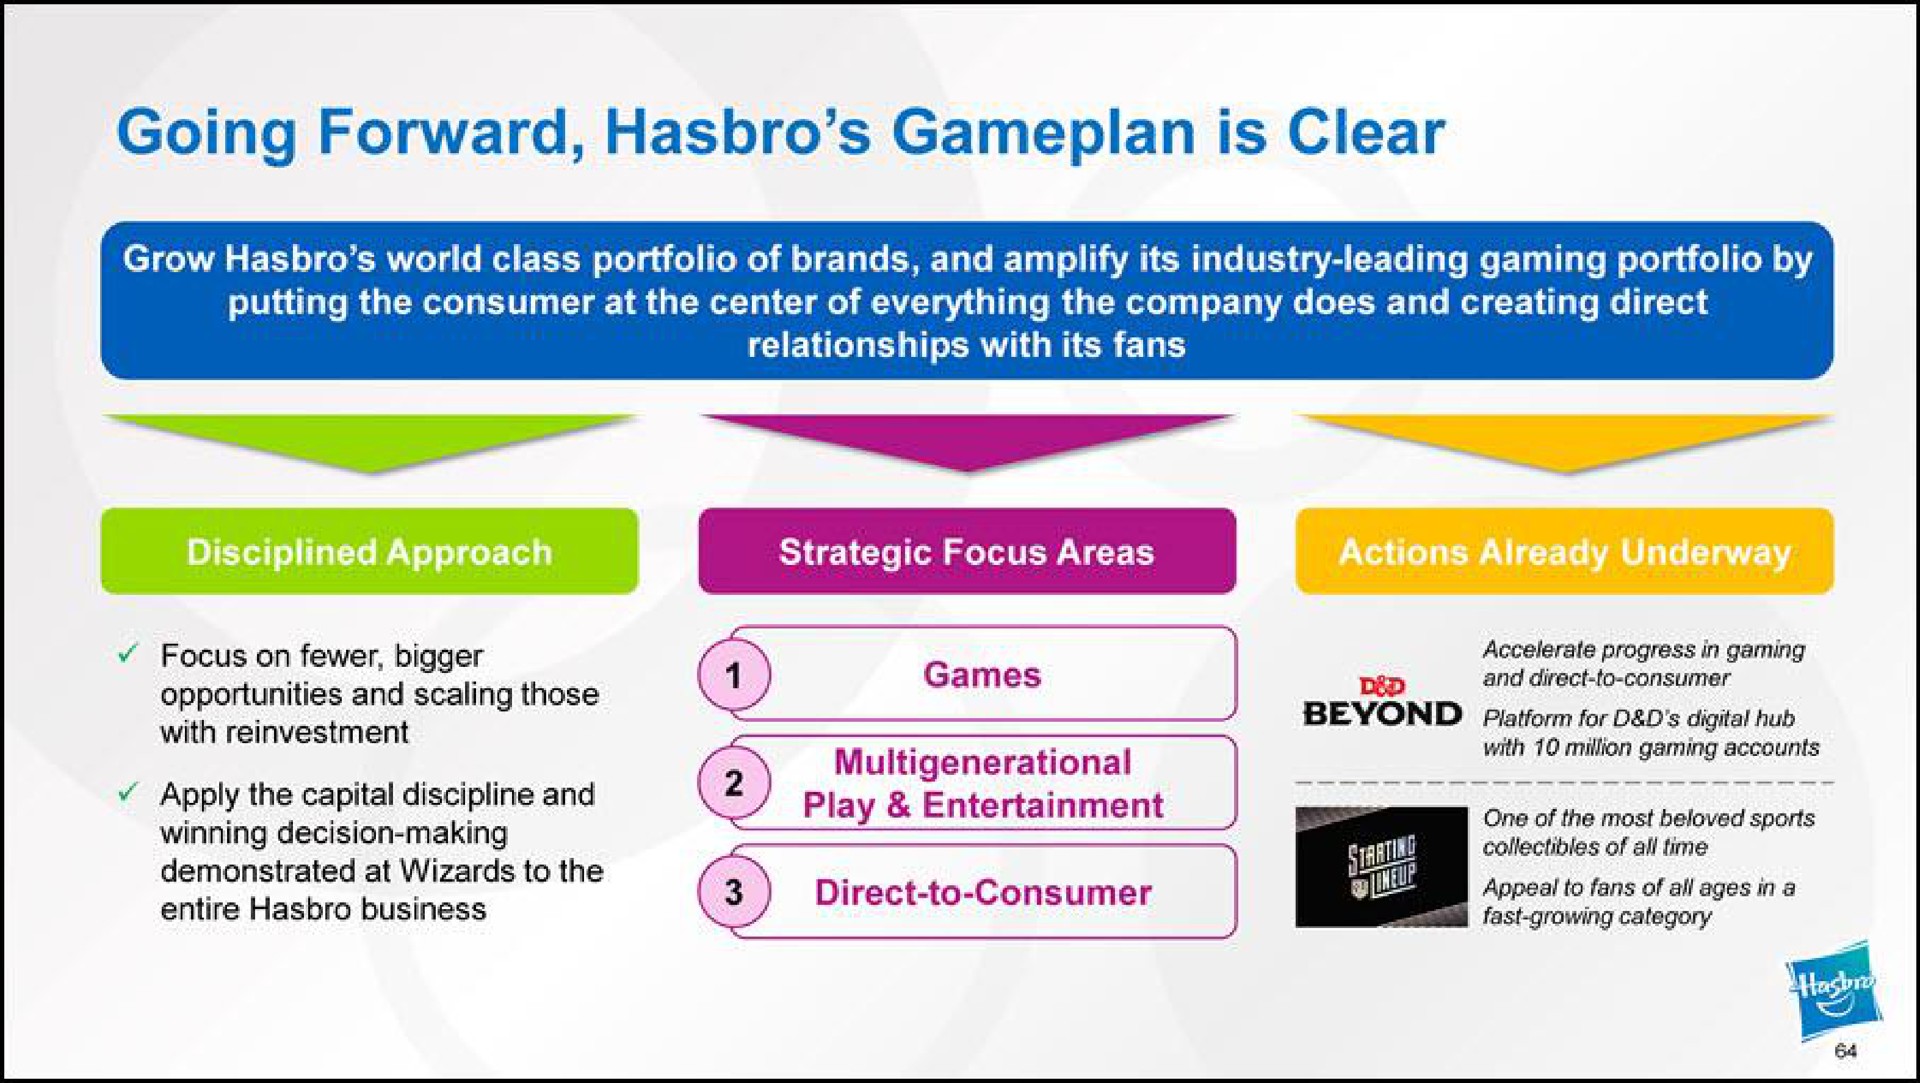 going forward is clear grow world class portfolio of brands and amplify its industry leading gaming portfolio by putting the consumer at the center of everything the company does and creating direct relationships with its fans focus on bigger strategic focus areas with reinvestment apply the capital discipline and winning decision making bate entertainment direct to consumer accelerate progress in gaming it million with ast one of the most beloved sports fans of all ages in a | Hasbro